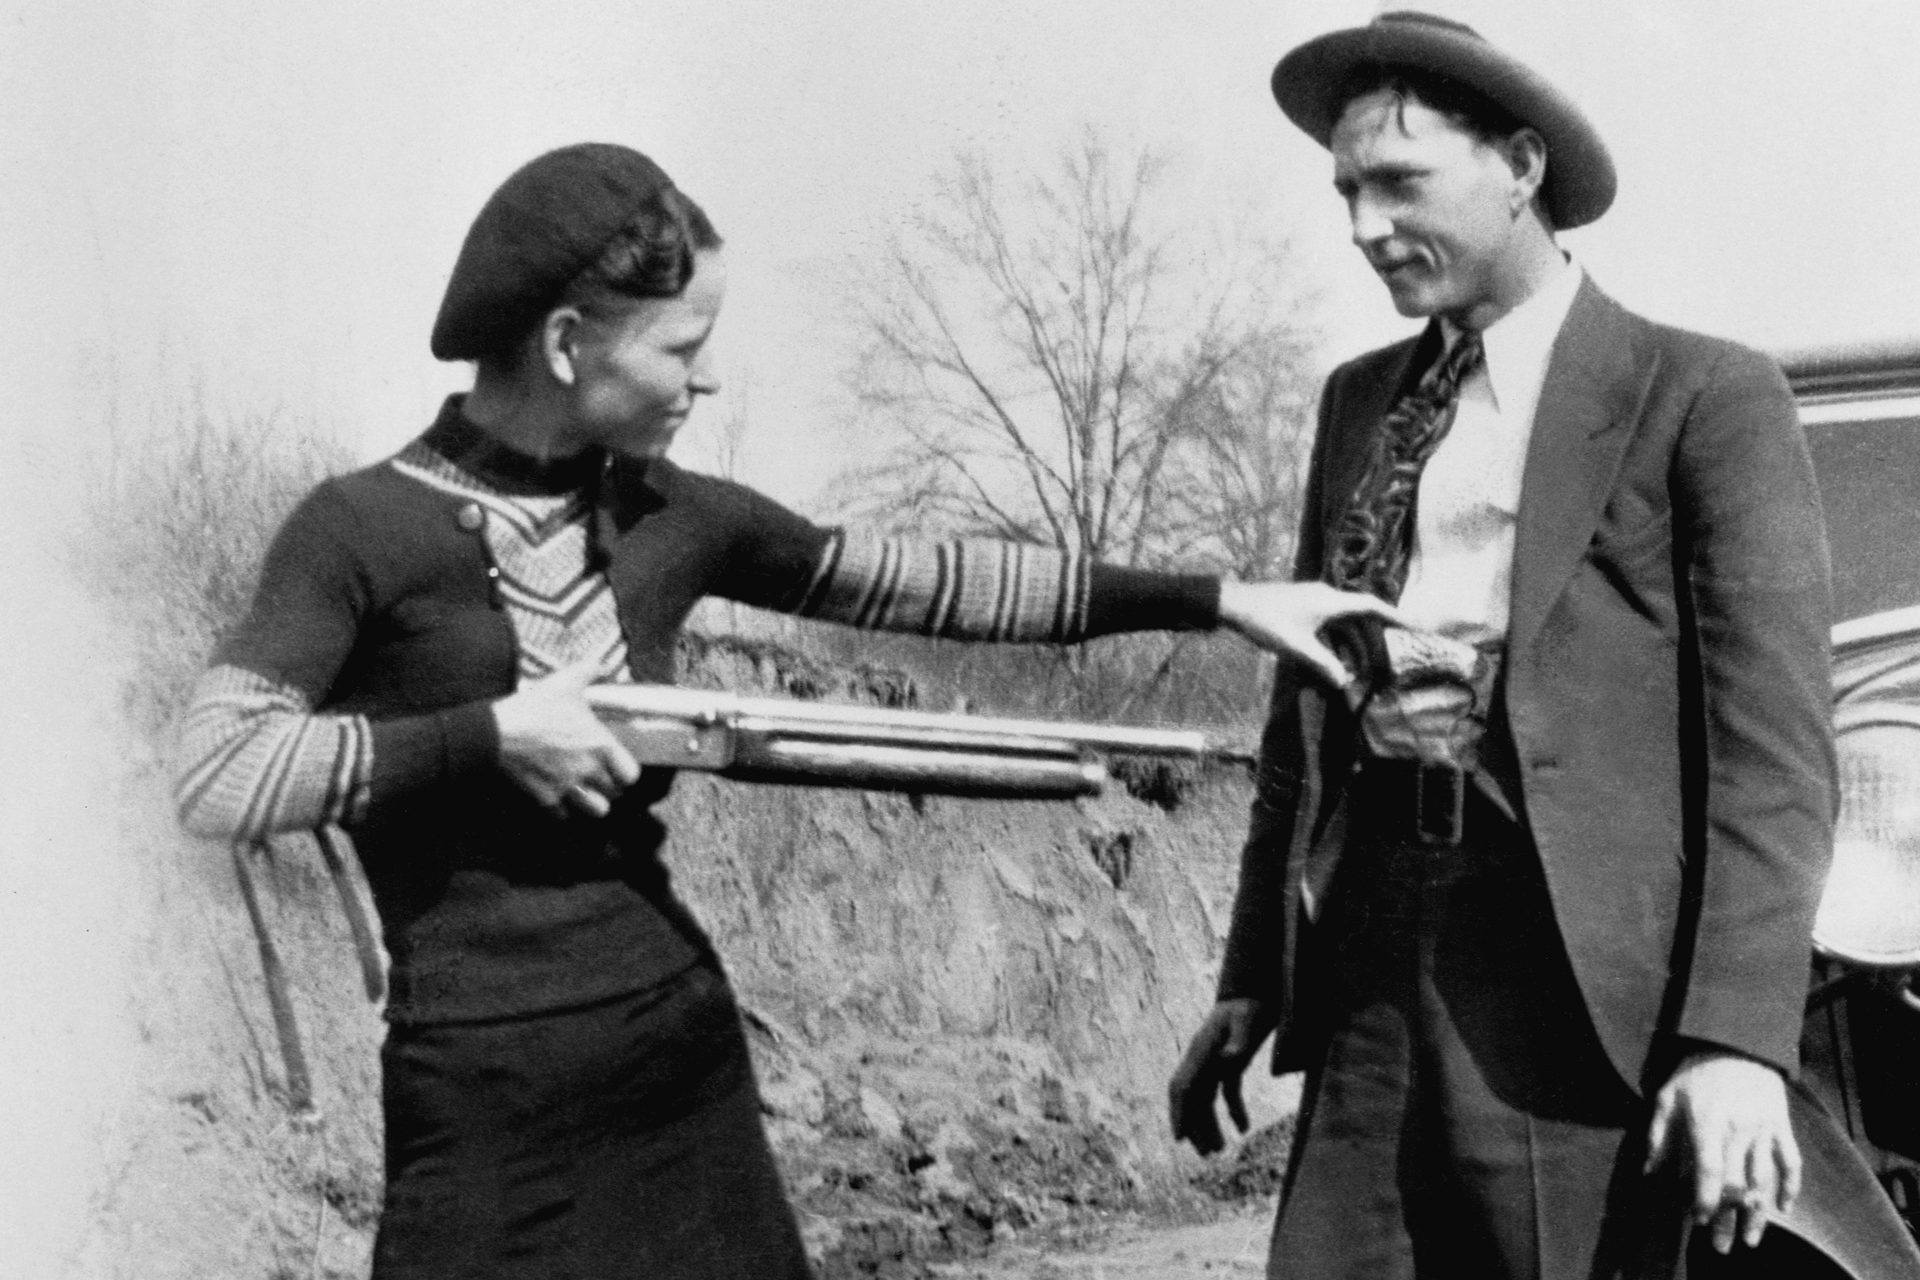 90 years of Bonnie and Clyde as cultural icons 